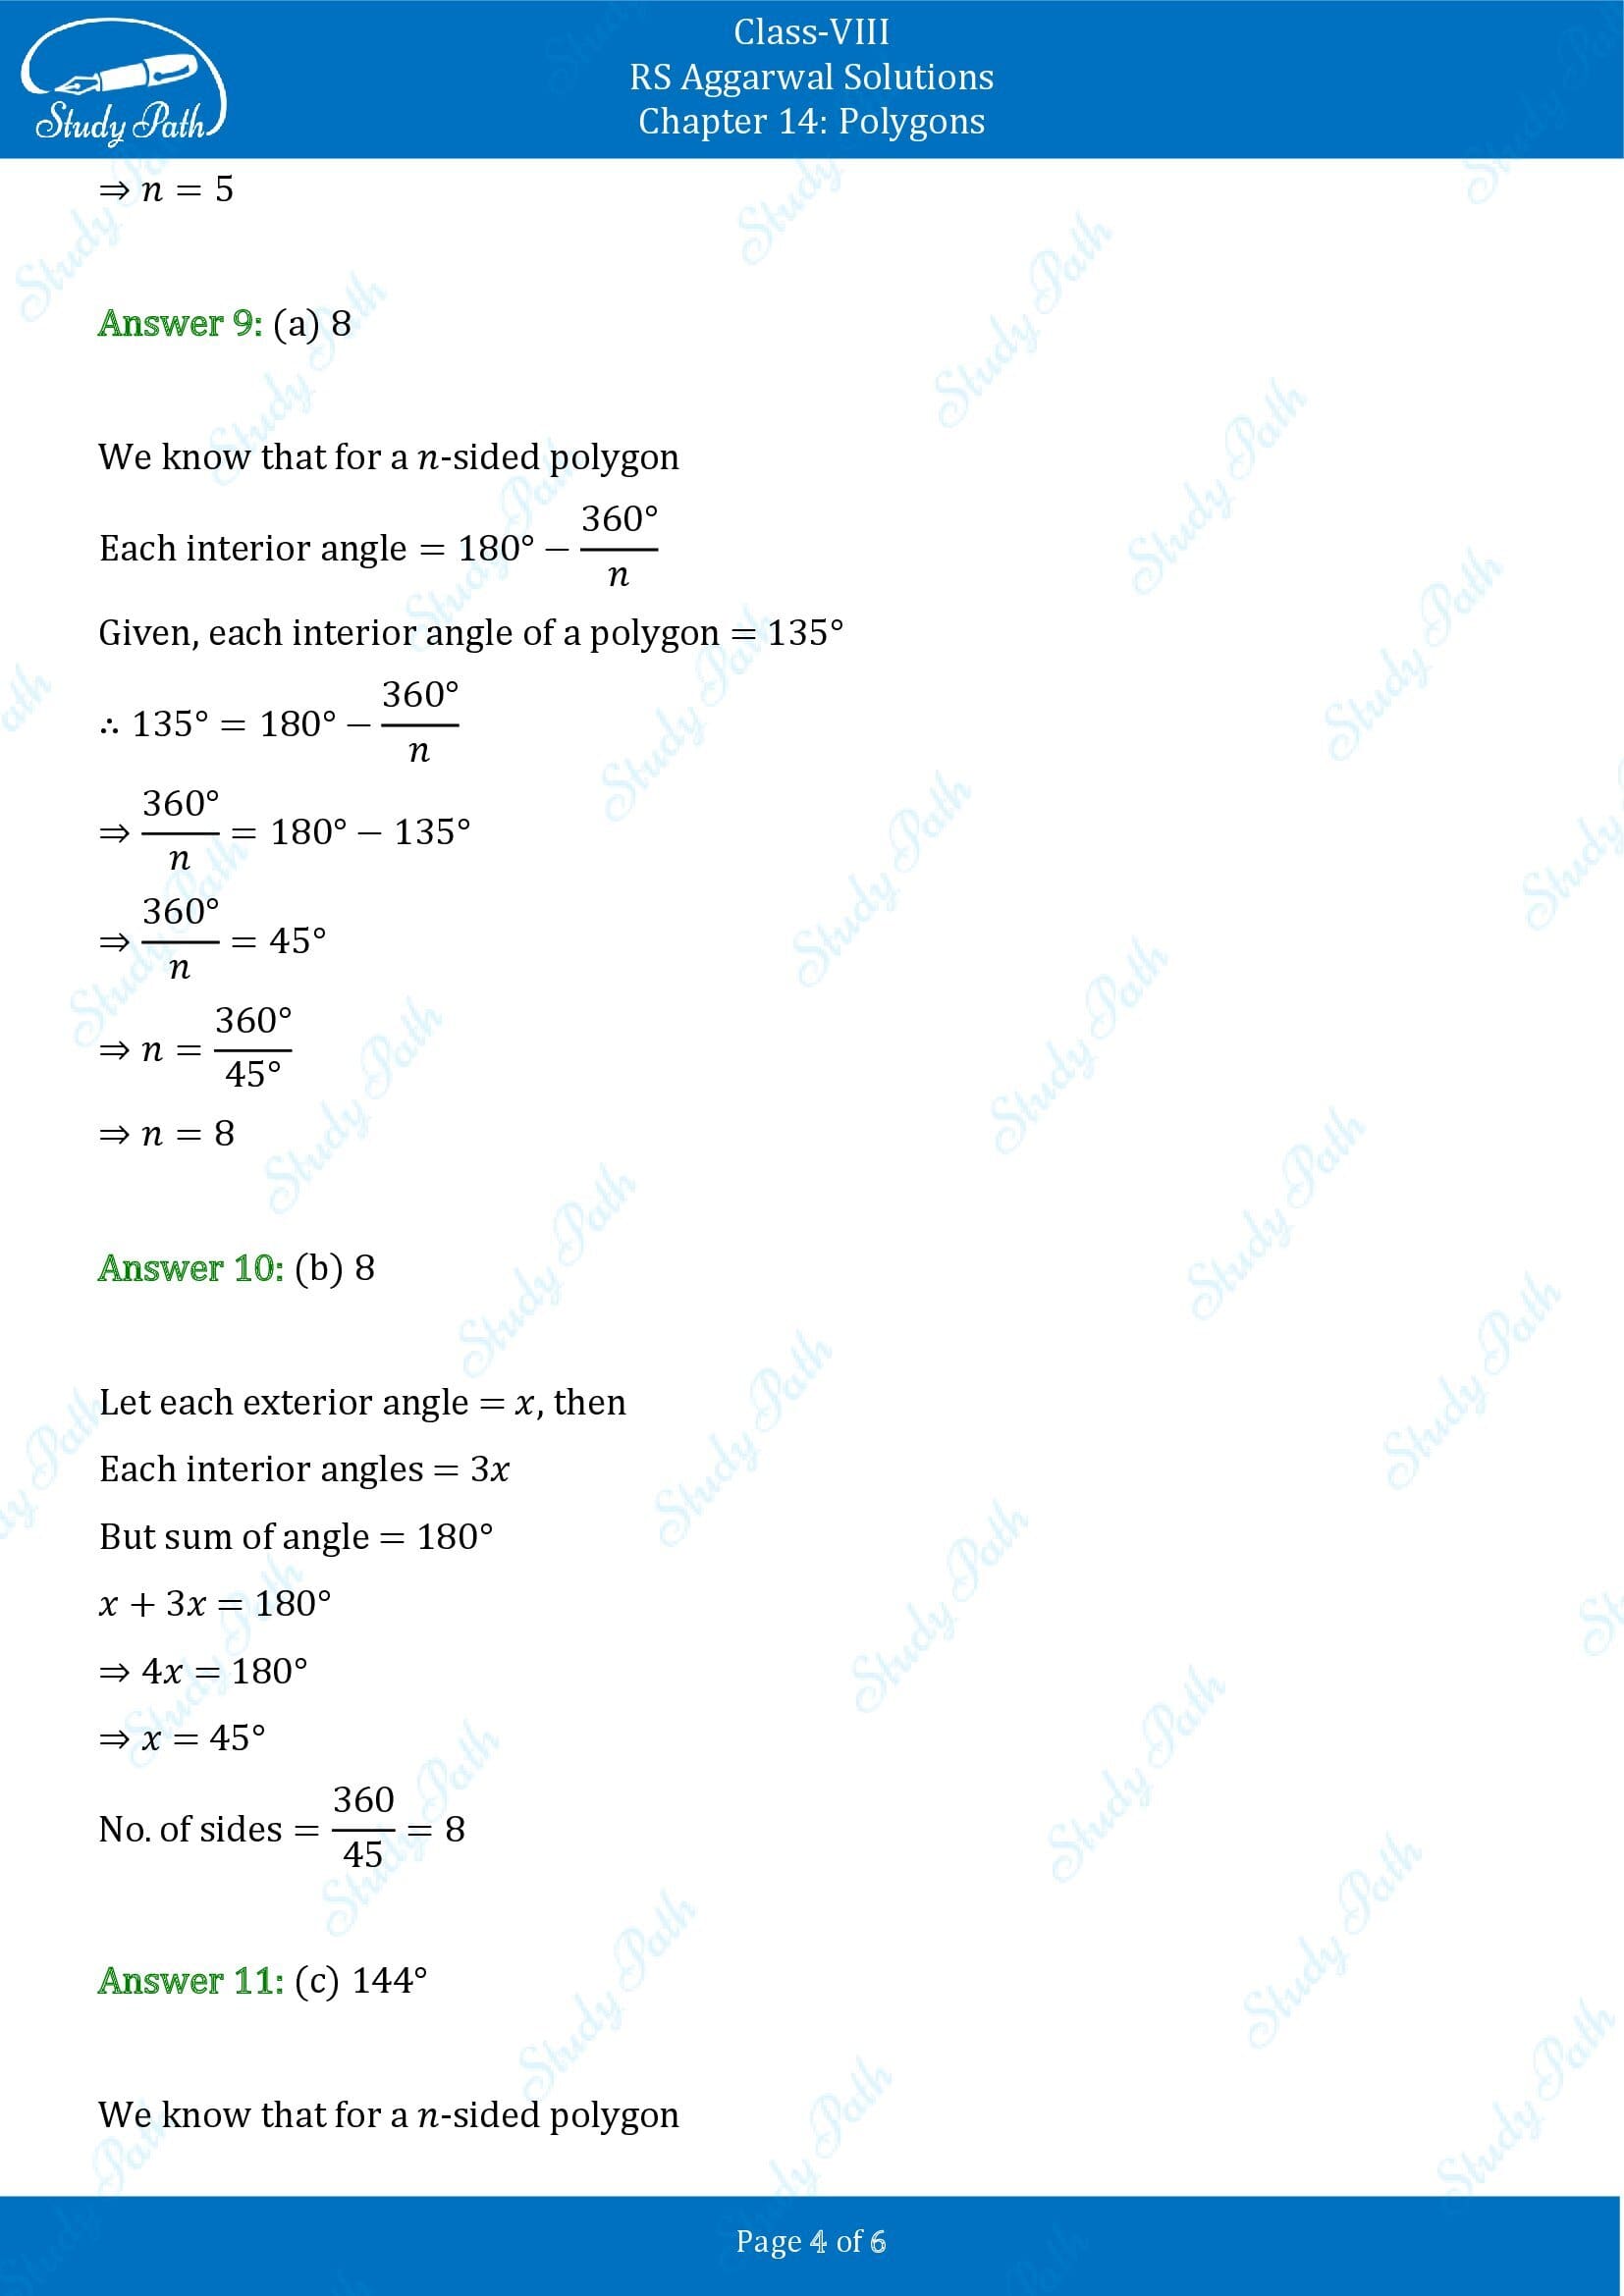 RS Aggarwal Solutions Class 8 Chapter 14 Polygons Exercise 14B MCQs 00004